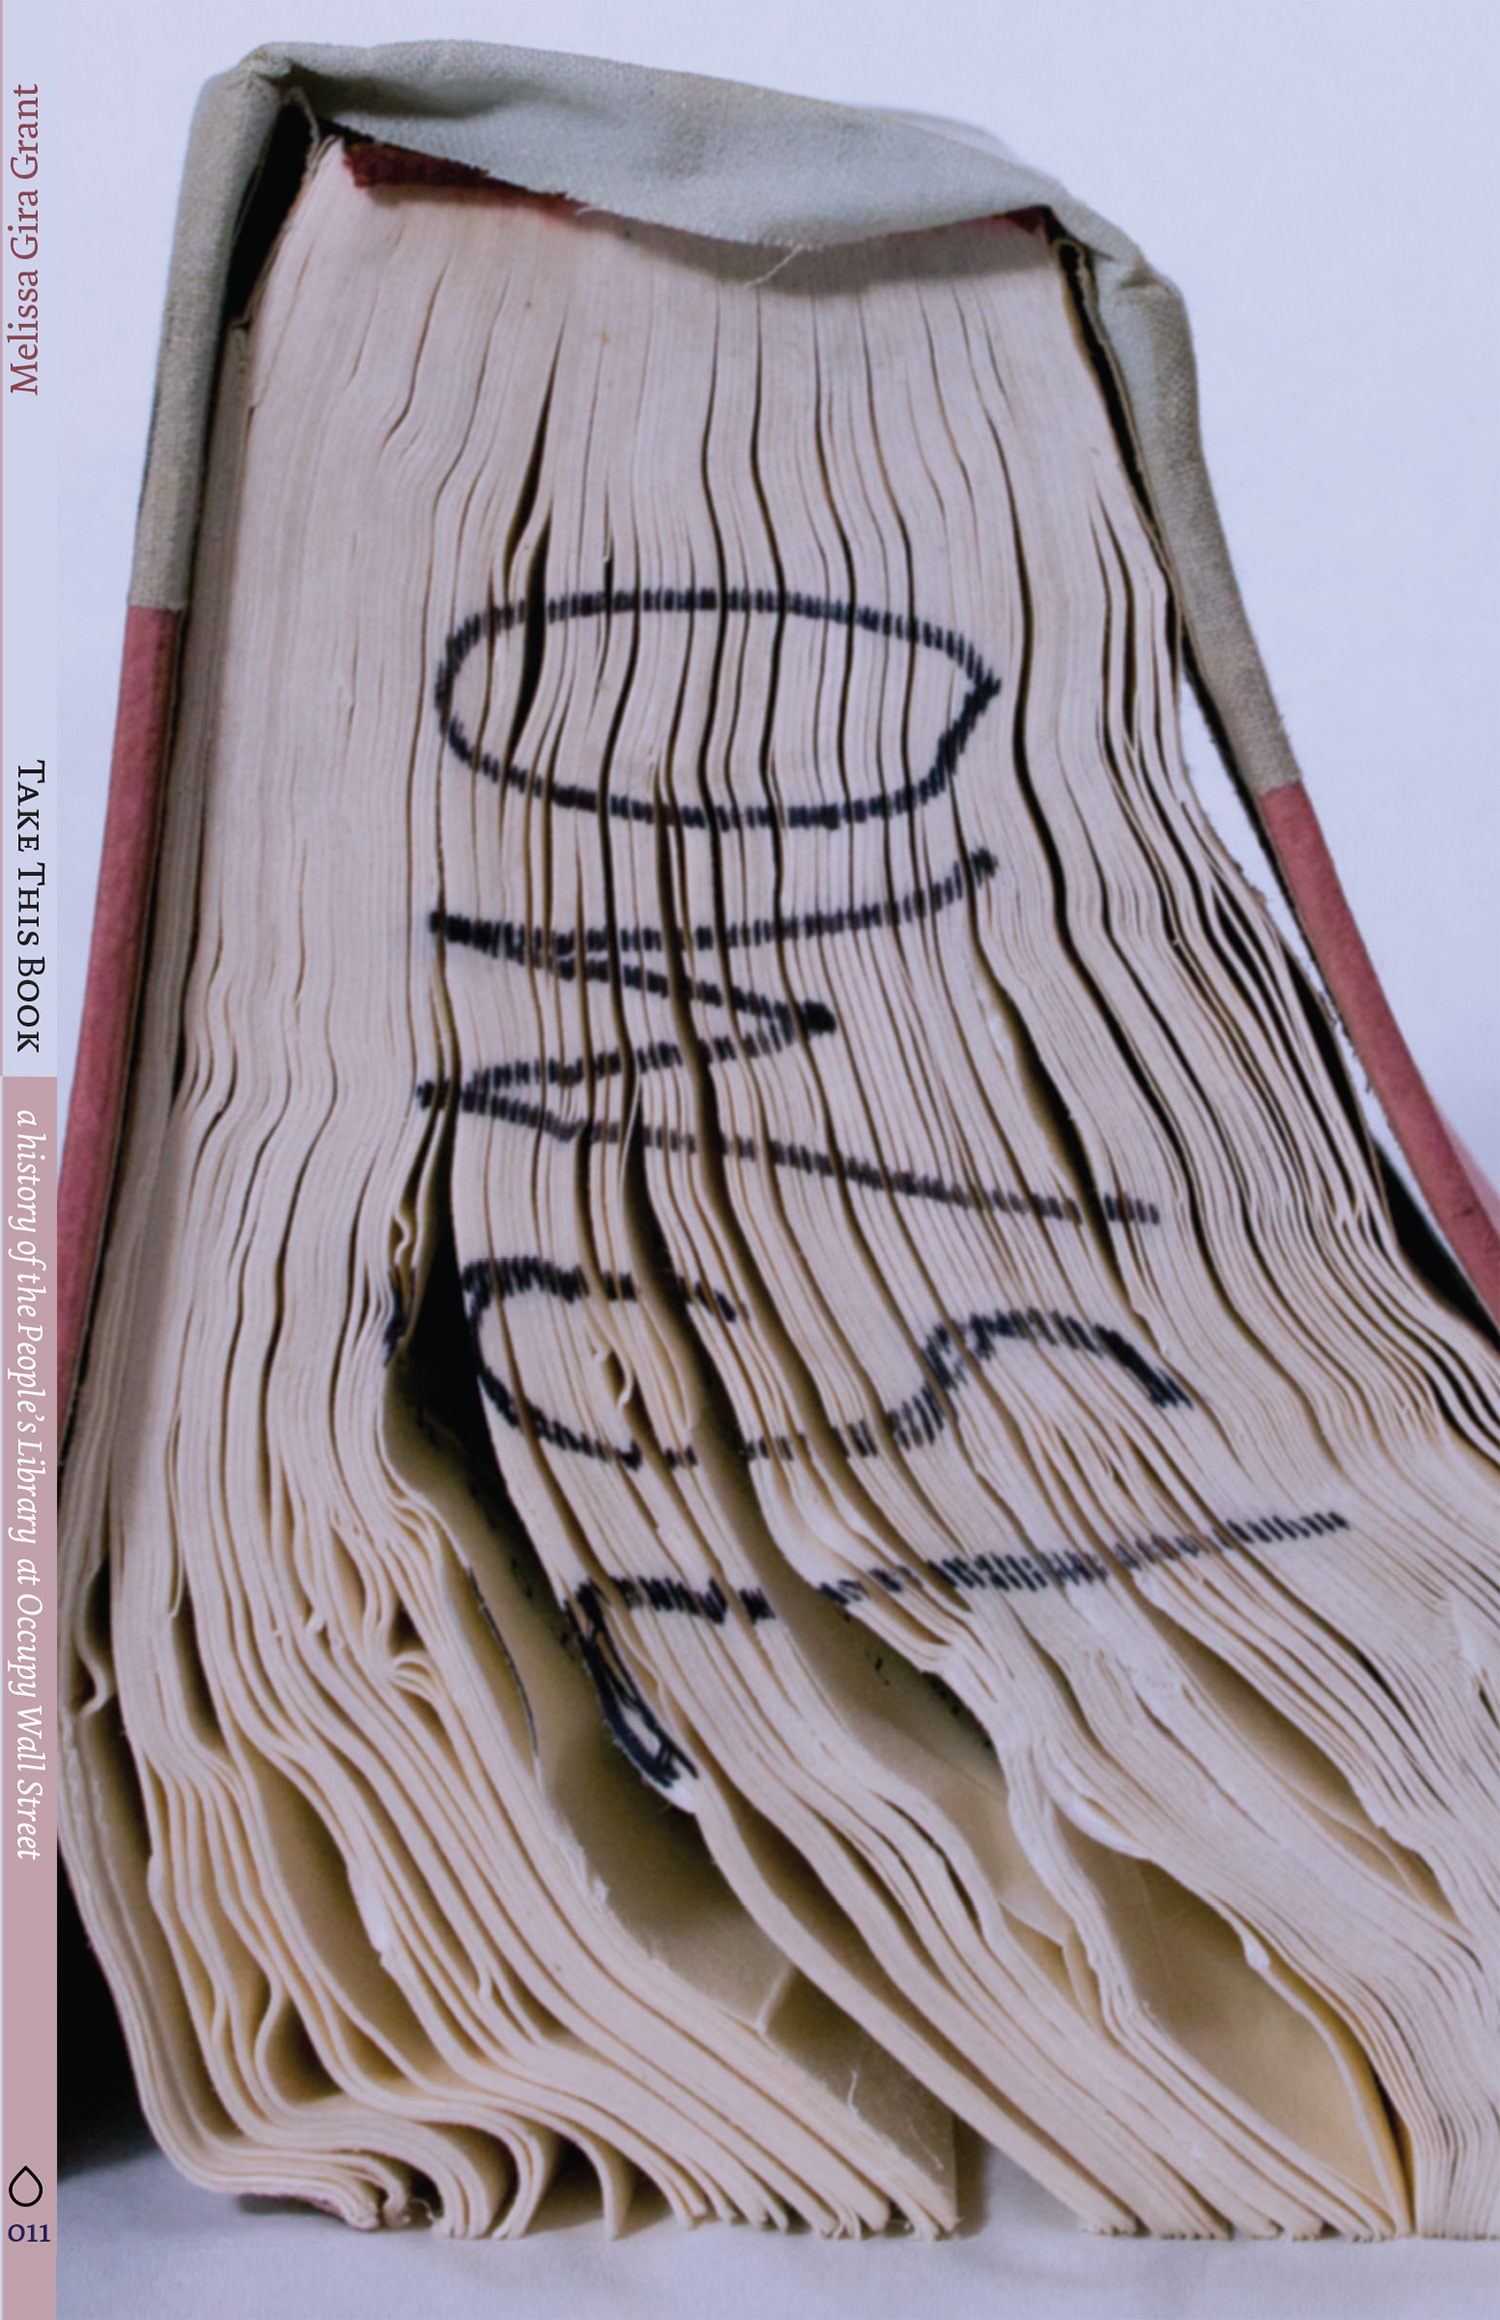 cover of Melissa Gira Grant's book Take This Book: A History of the People's Library at Occupy Wall Street showing a water damaged book